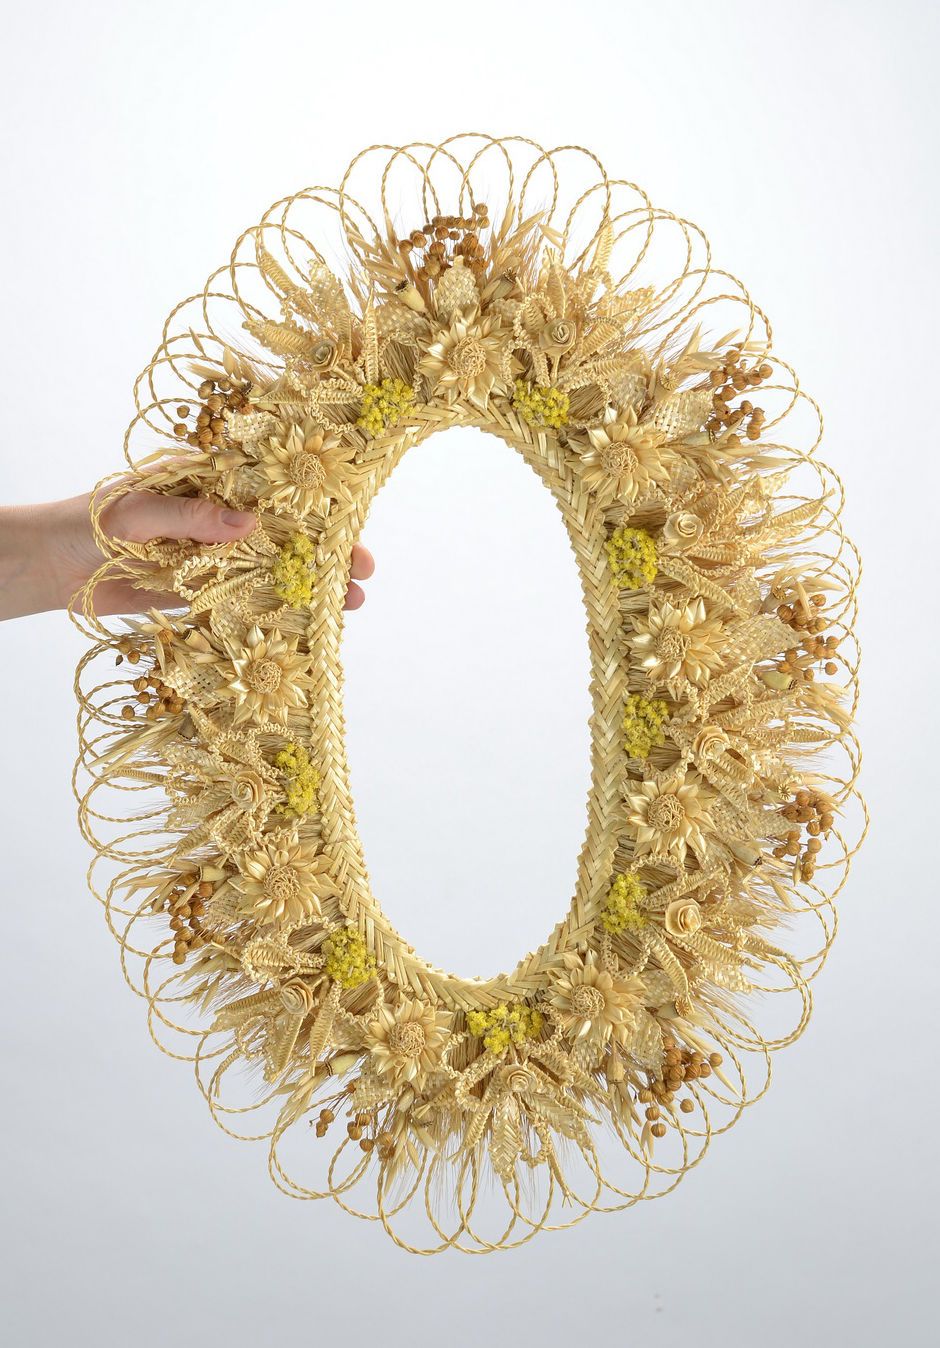 Oval family amulet made of straw photo 2